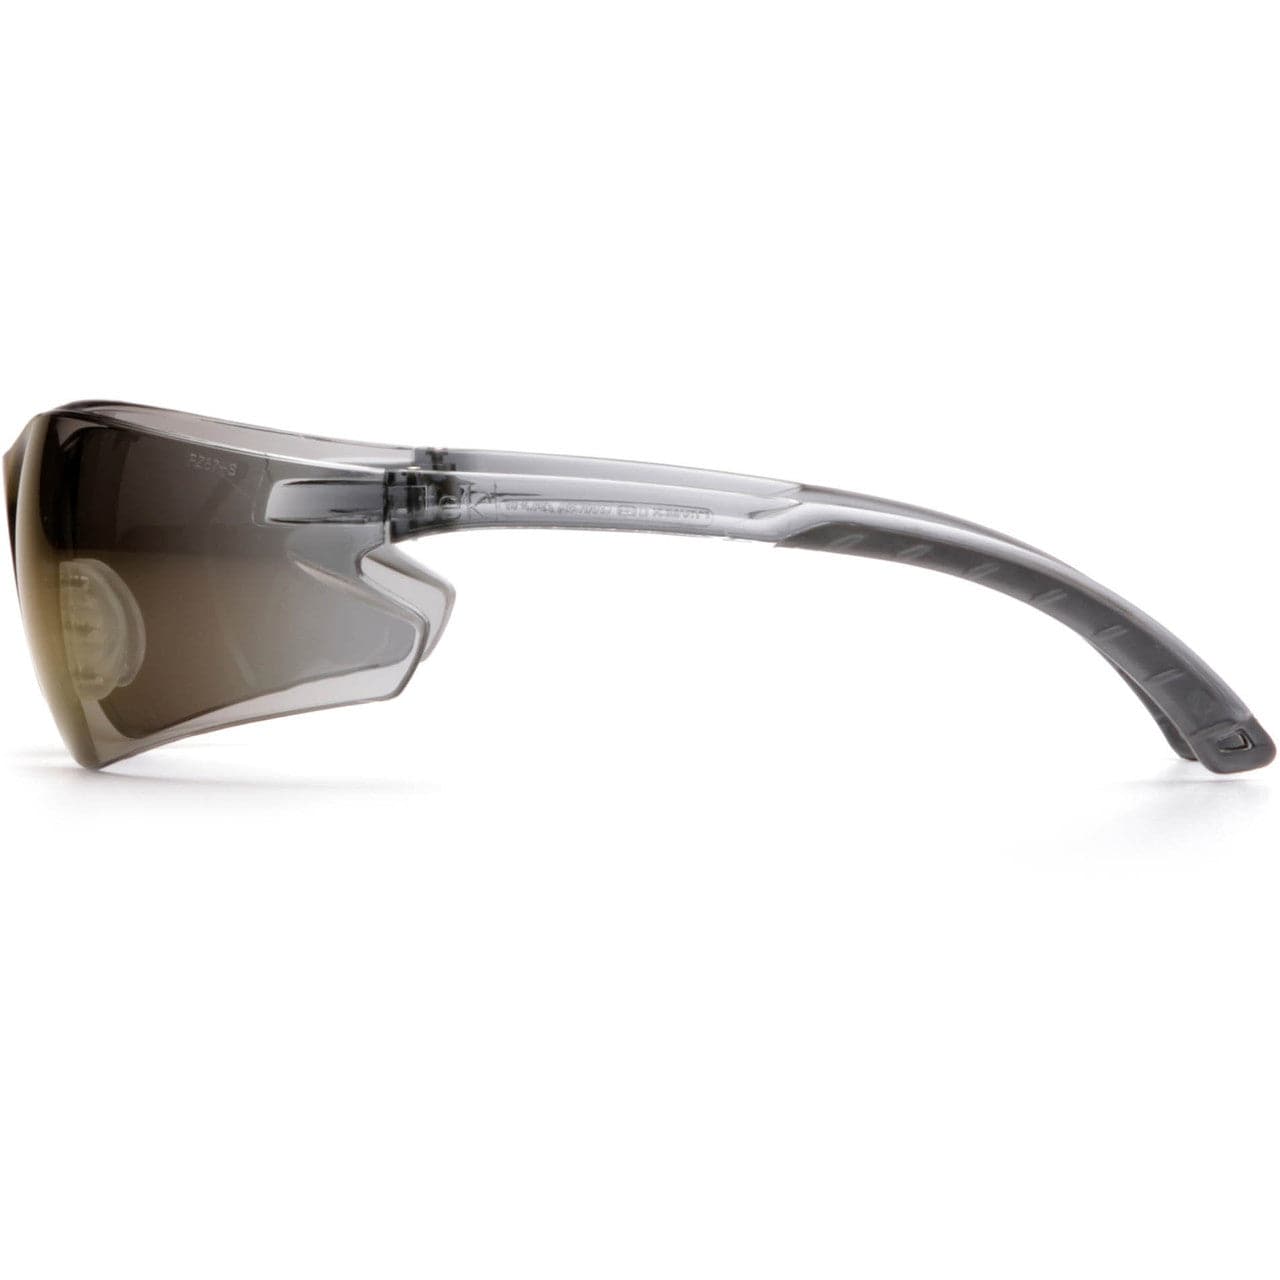 Pyramex Itek Safety Glasses with Blue Mirror Lens S5875S Side View